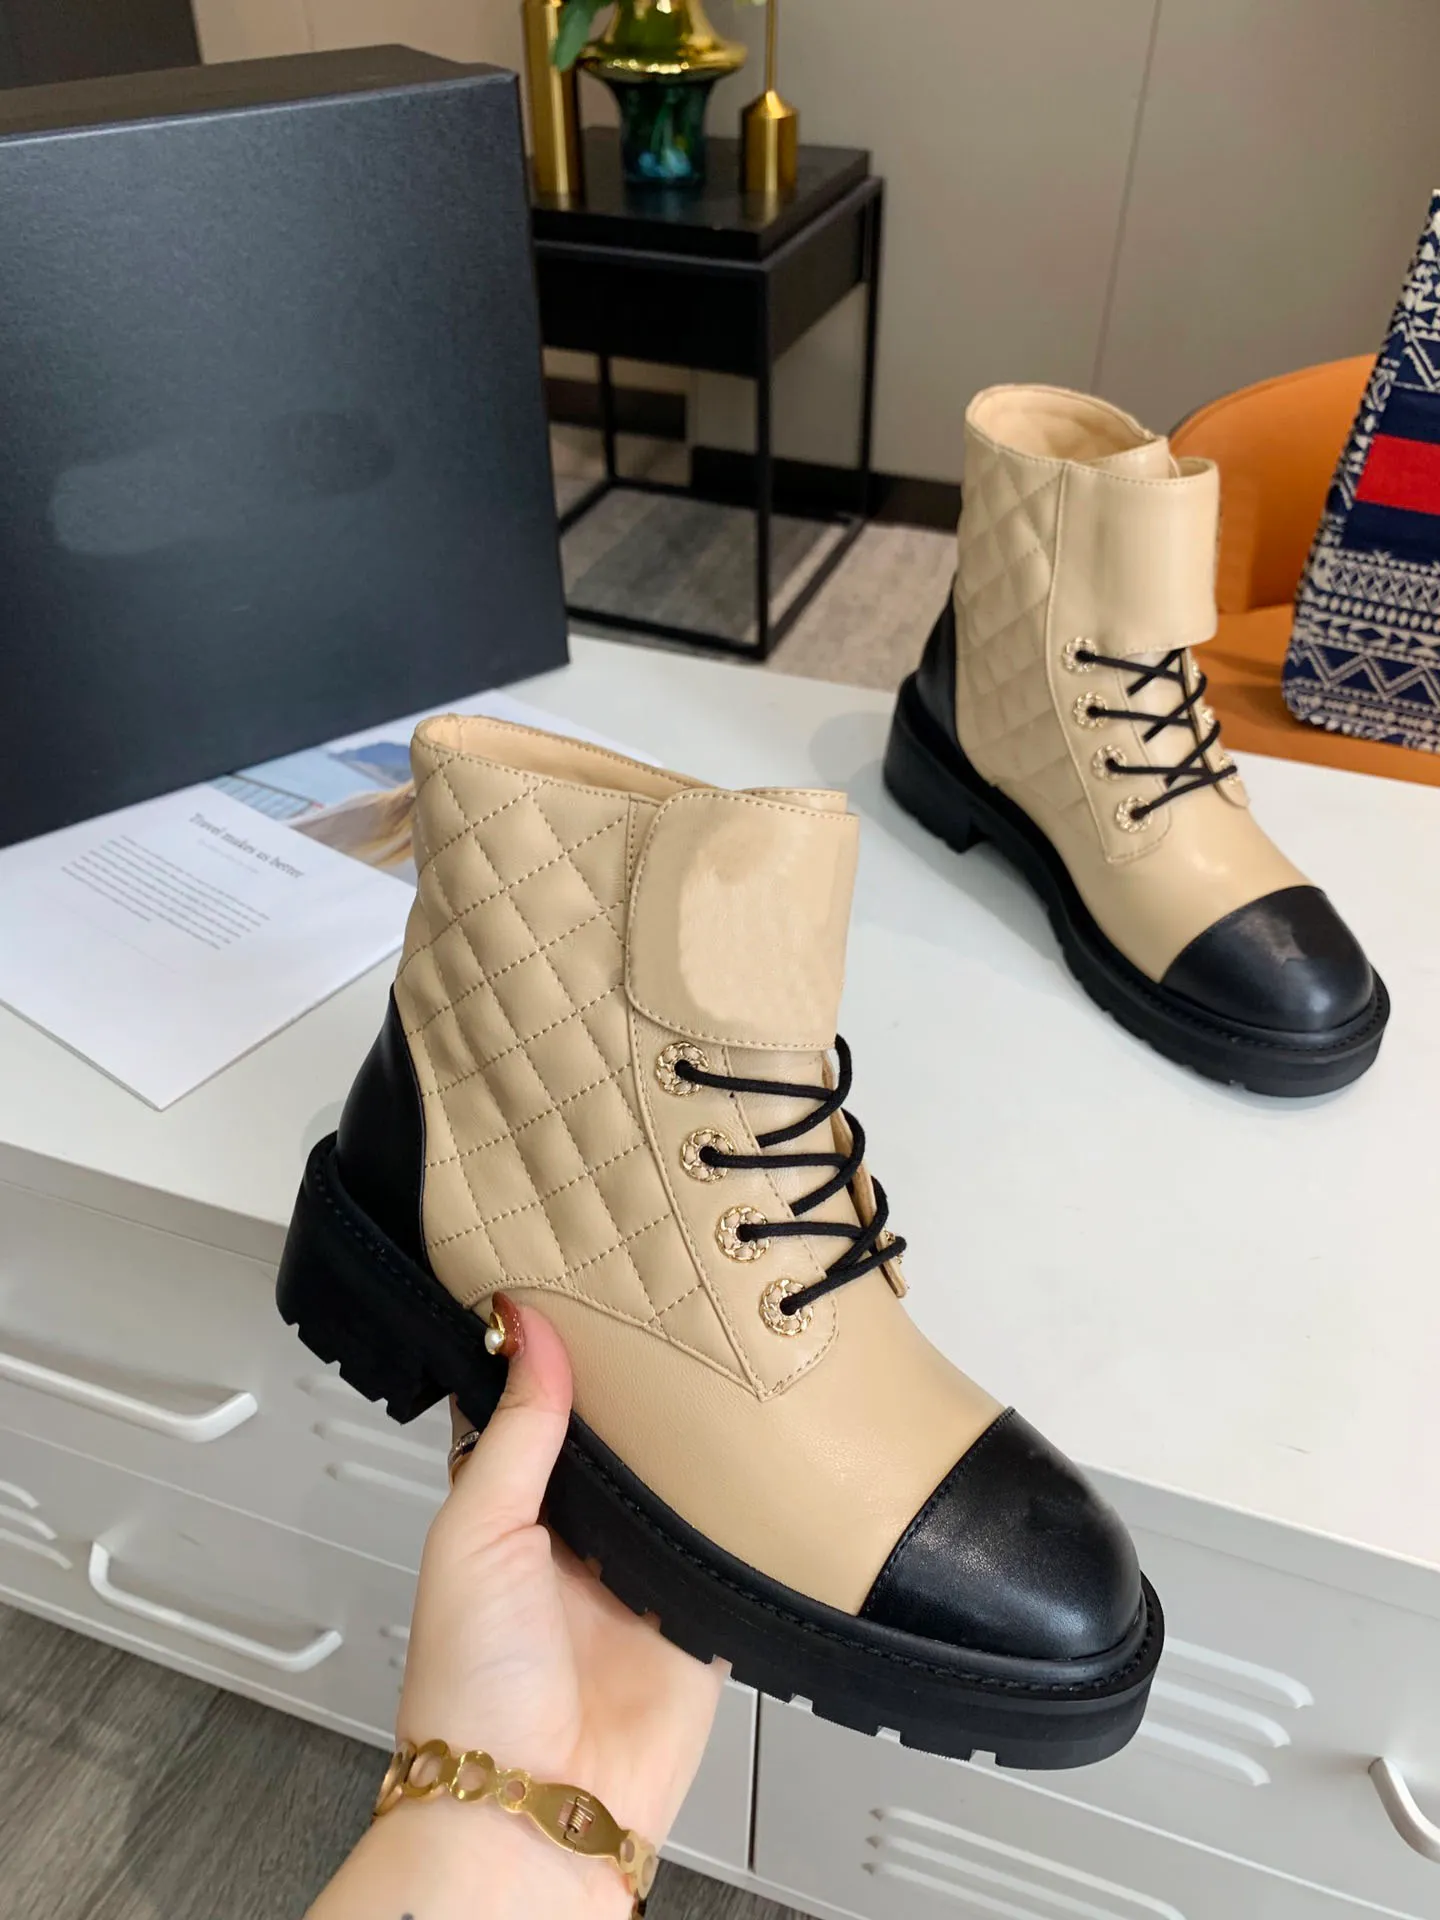 Luxury Designer Women Leather Ankle Boots Laceup Zipper Flat Low Heel Boot Flock Corduroy Fashion Comfortable Top quality Size 352788096